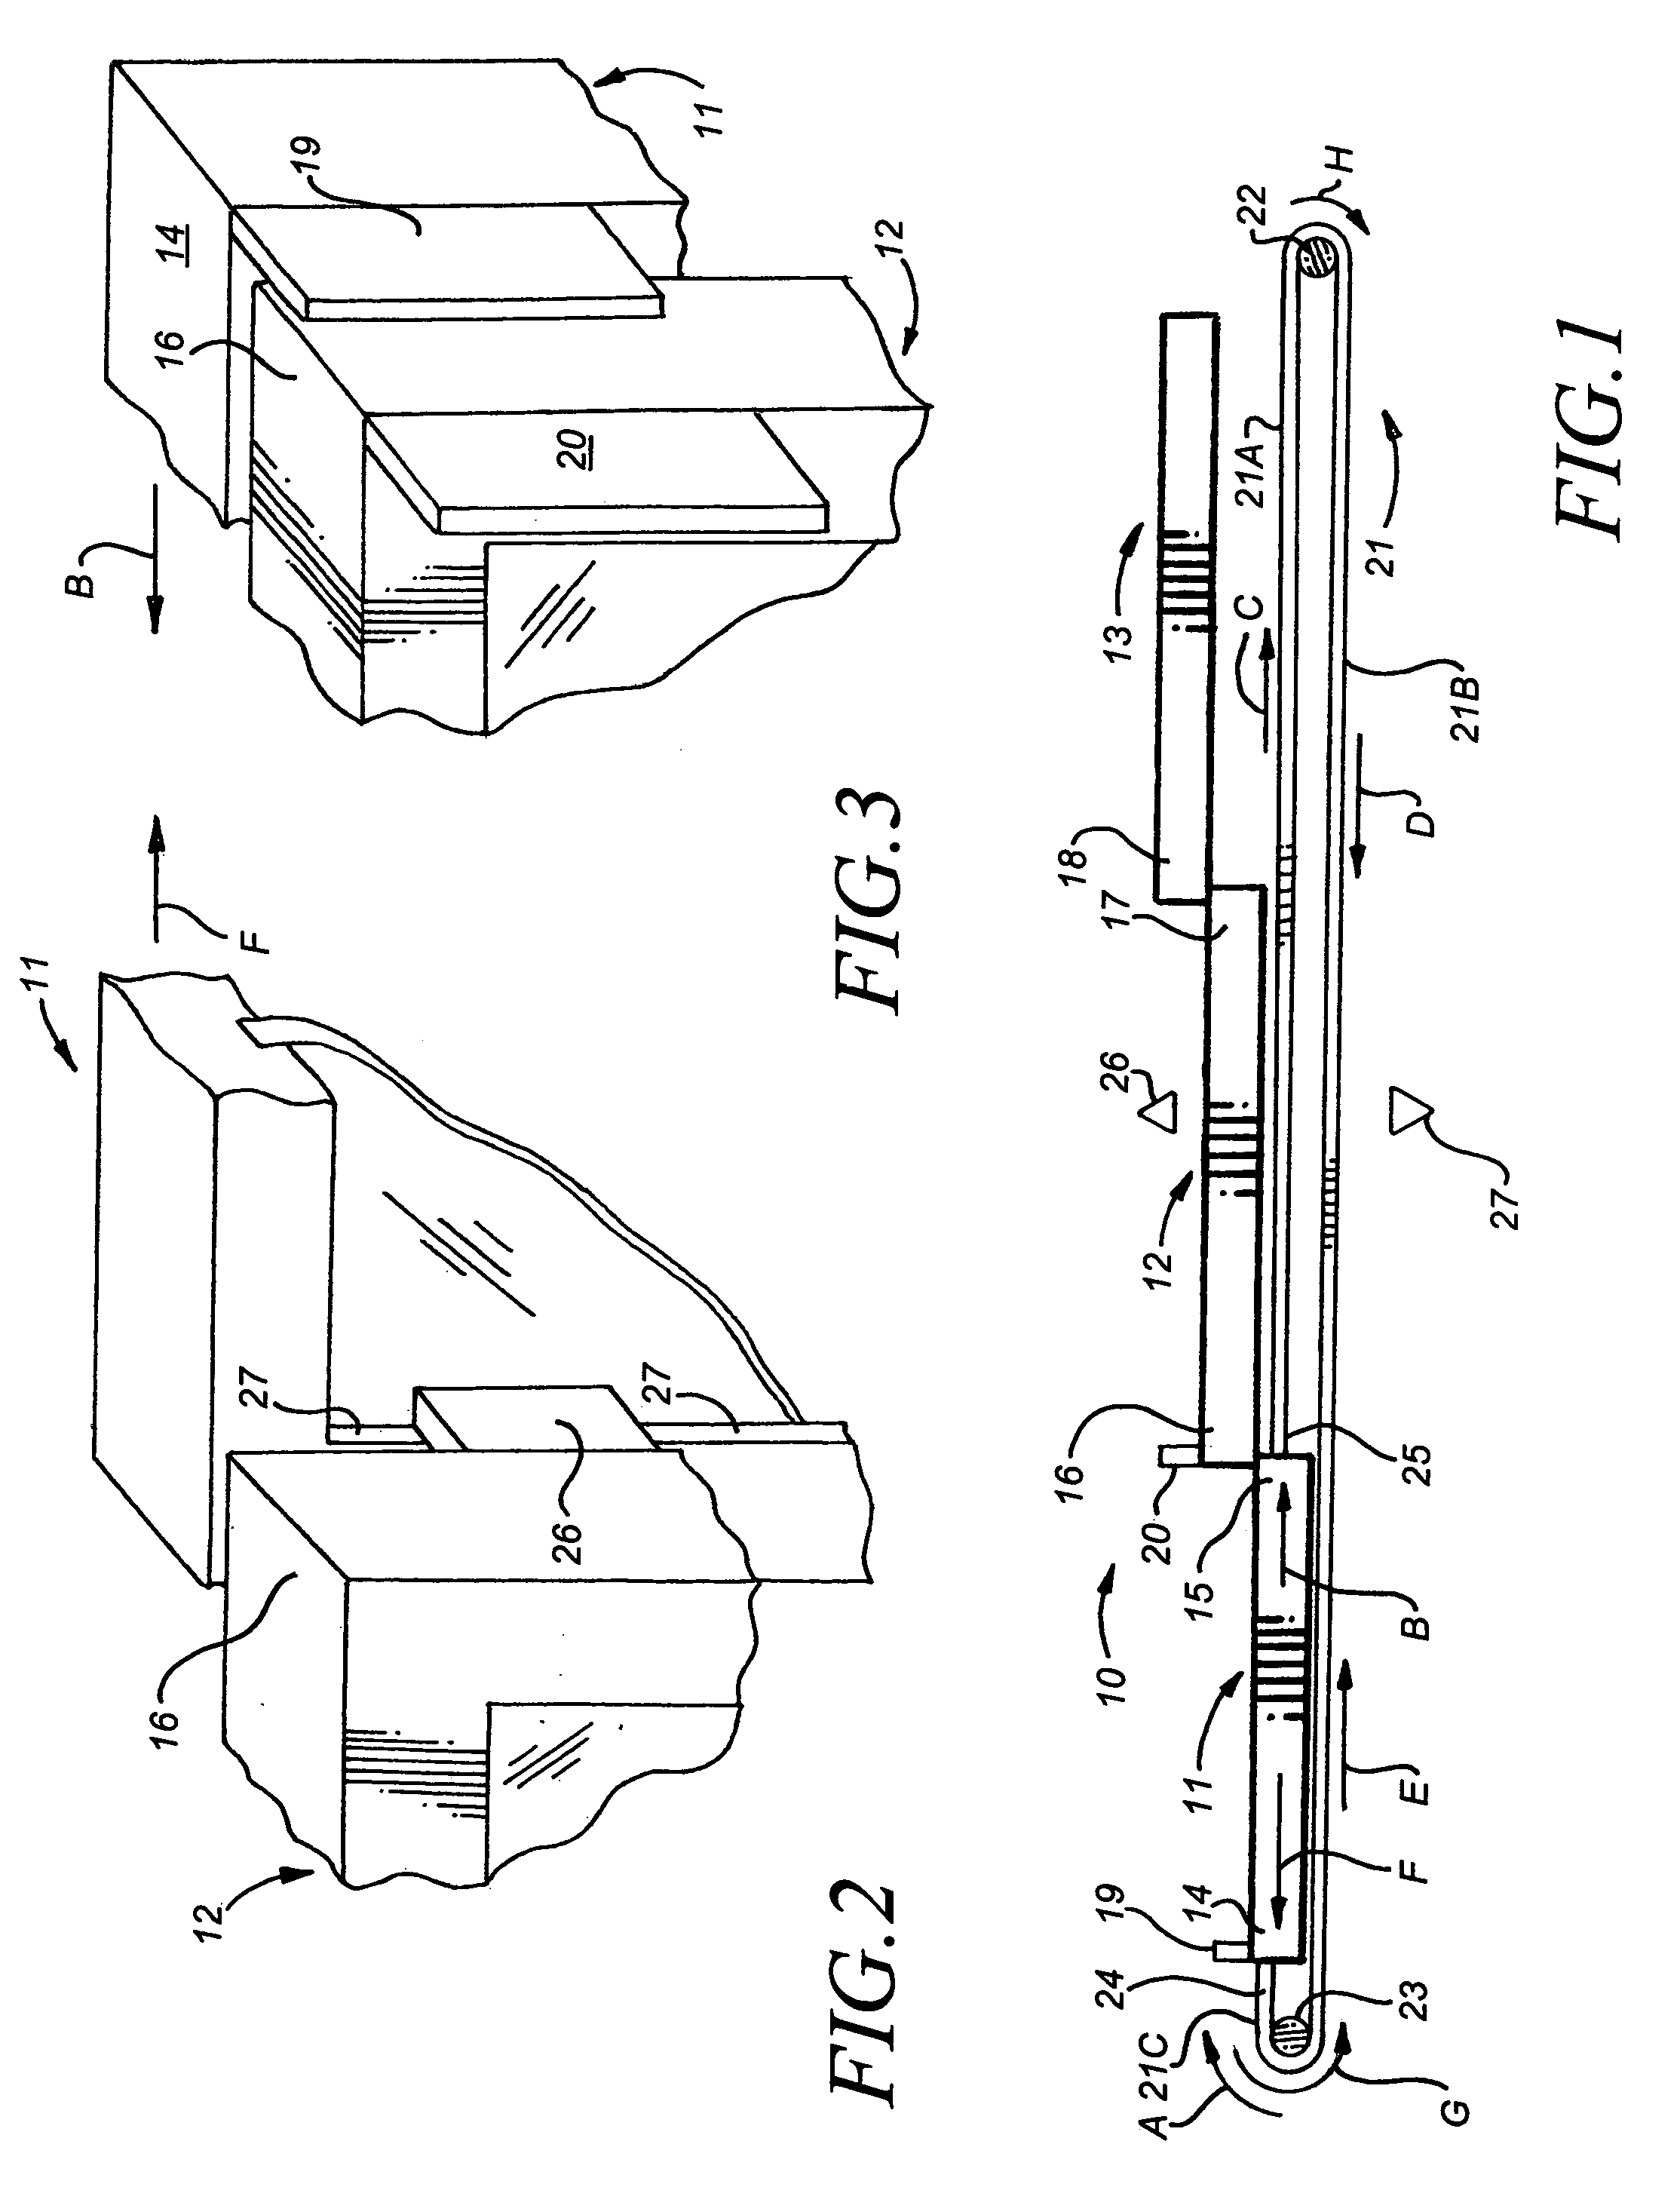 Inertial control system for opening and closing multiple sliding doors in a common direction